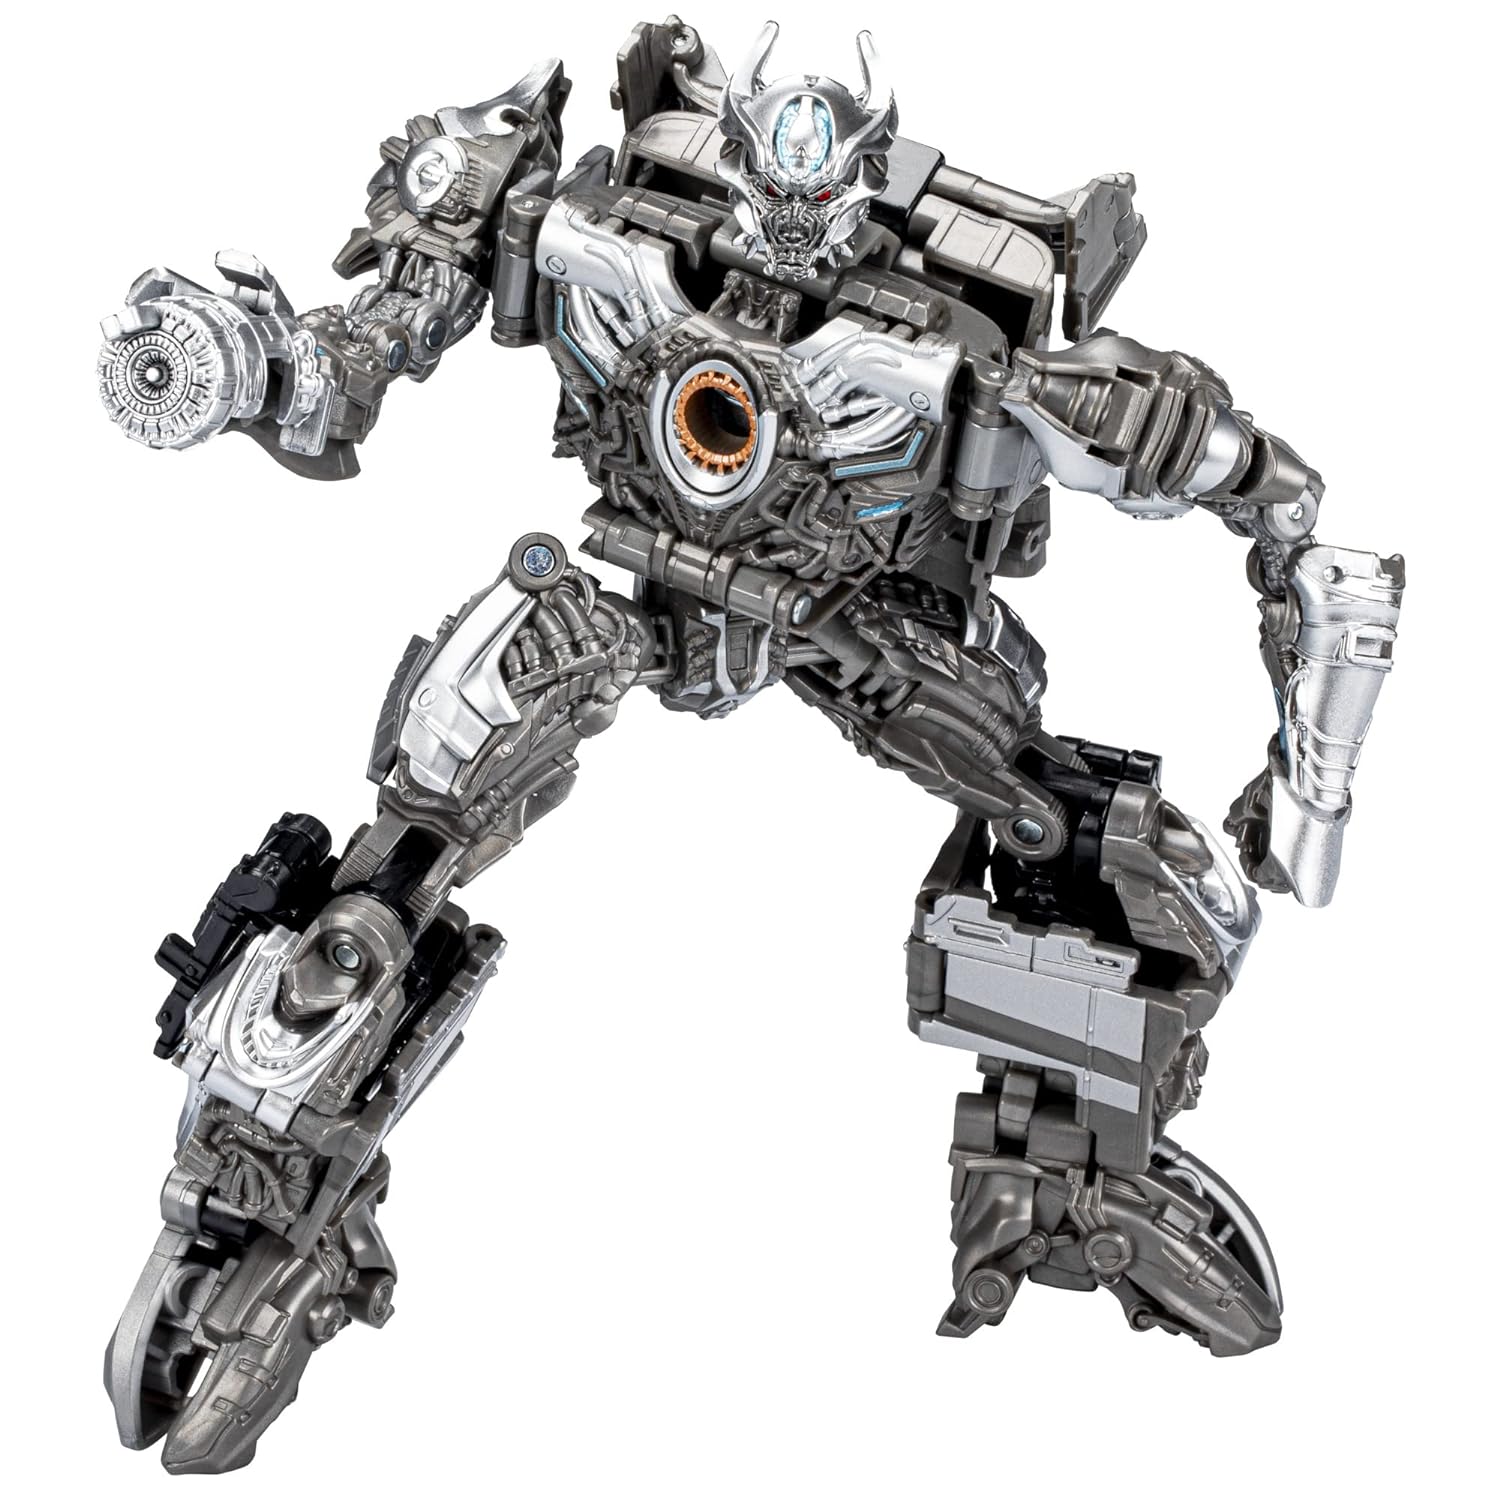 Hasbro Transformers Toys Studio Series 90 Voyager Class Age of Extinction Galvatron Action Figure - Ages 8 and Up, 6.5-inch, Mu…